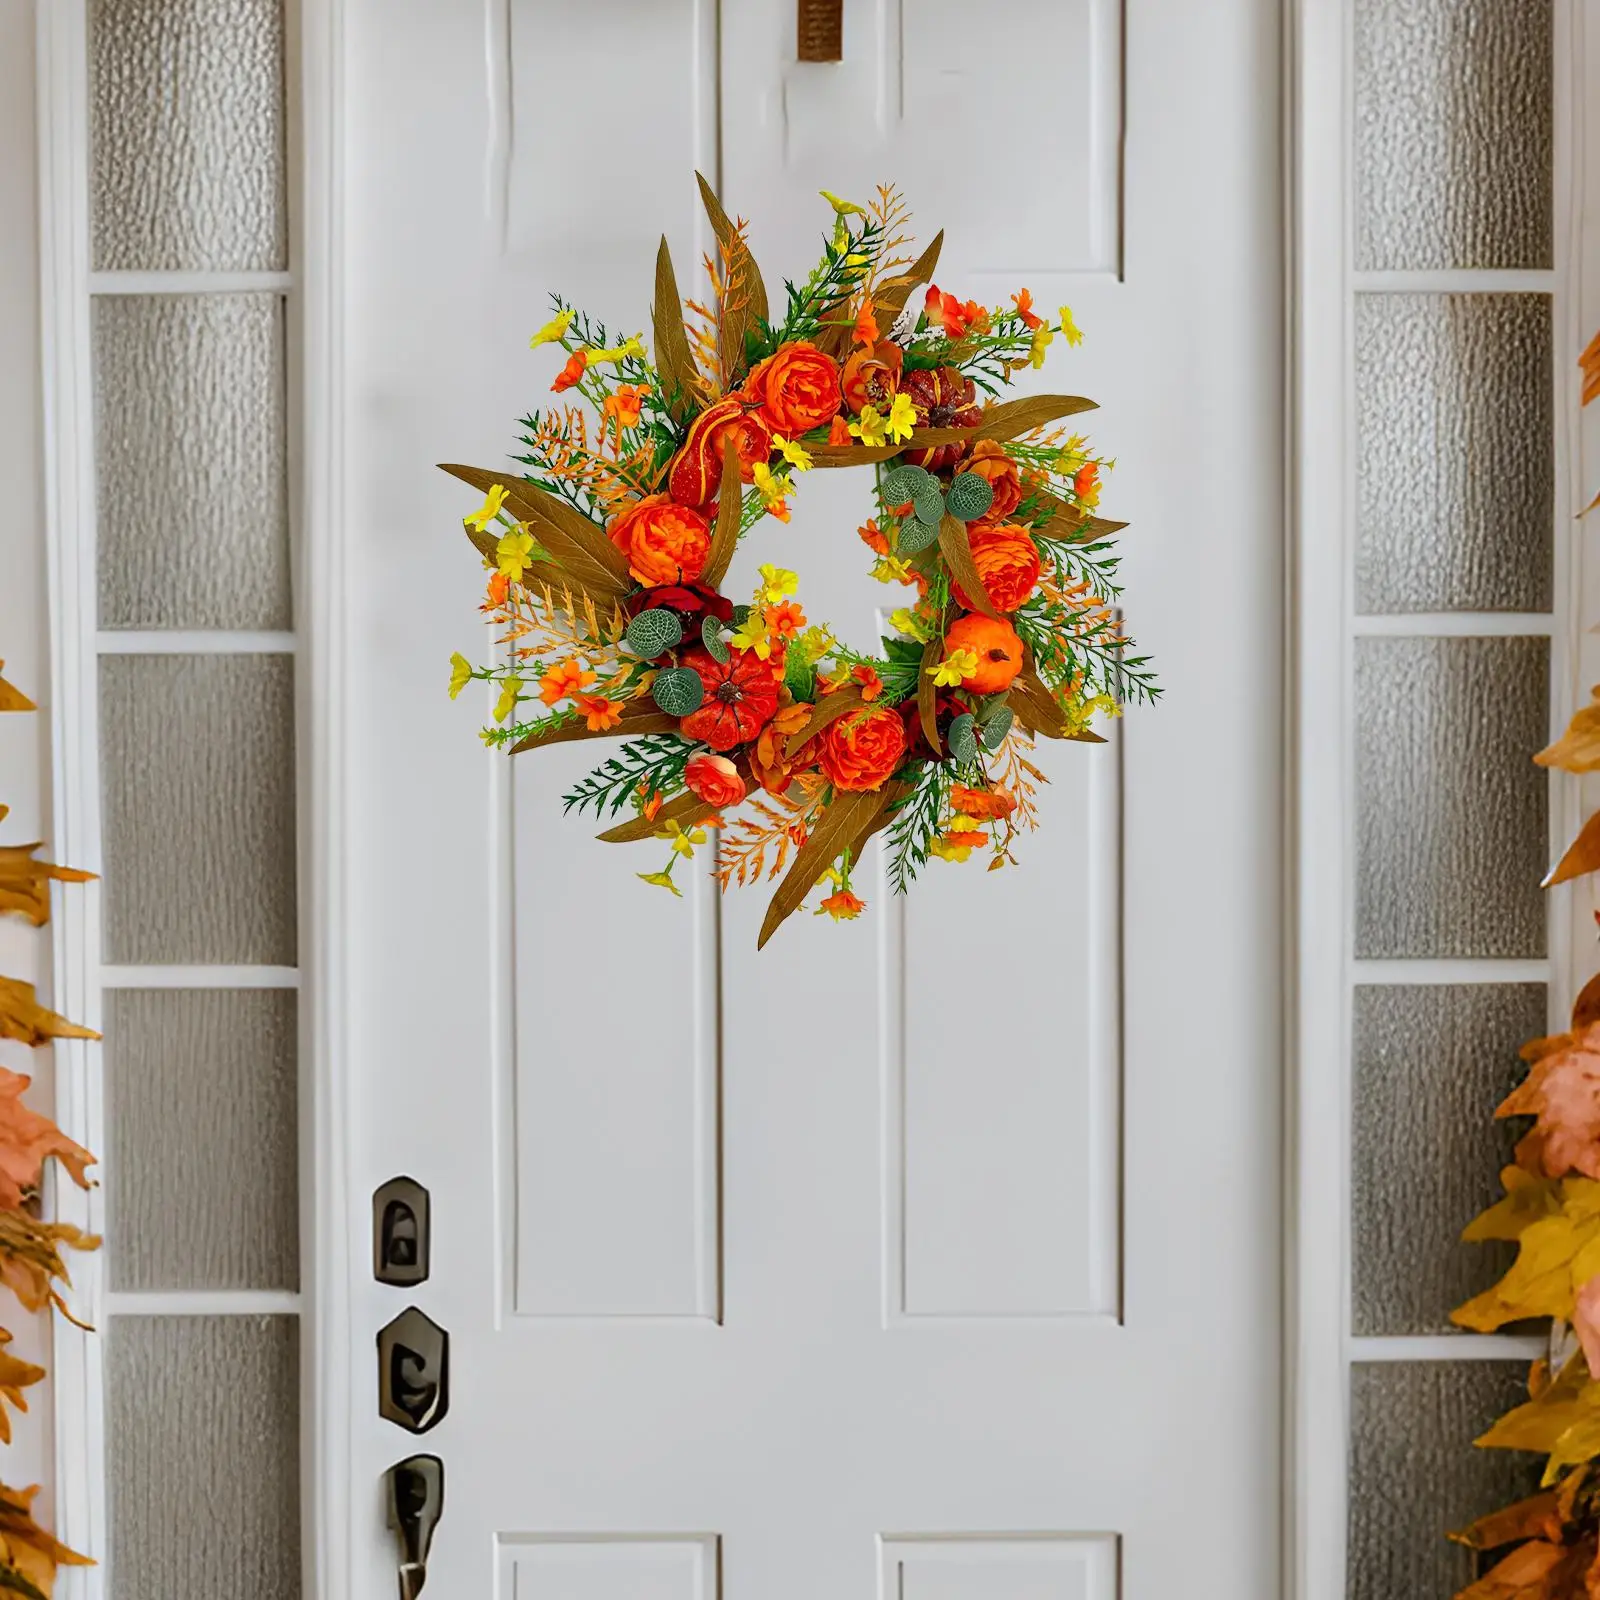 Fall Wreath Fall Peony and Pumpkin Wreath Autumn Wreath for Front Door for Fall Harvest Festival Thanksgiving Indoor Decor